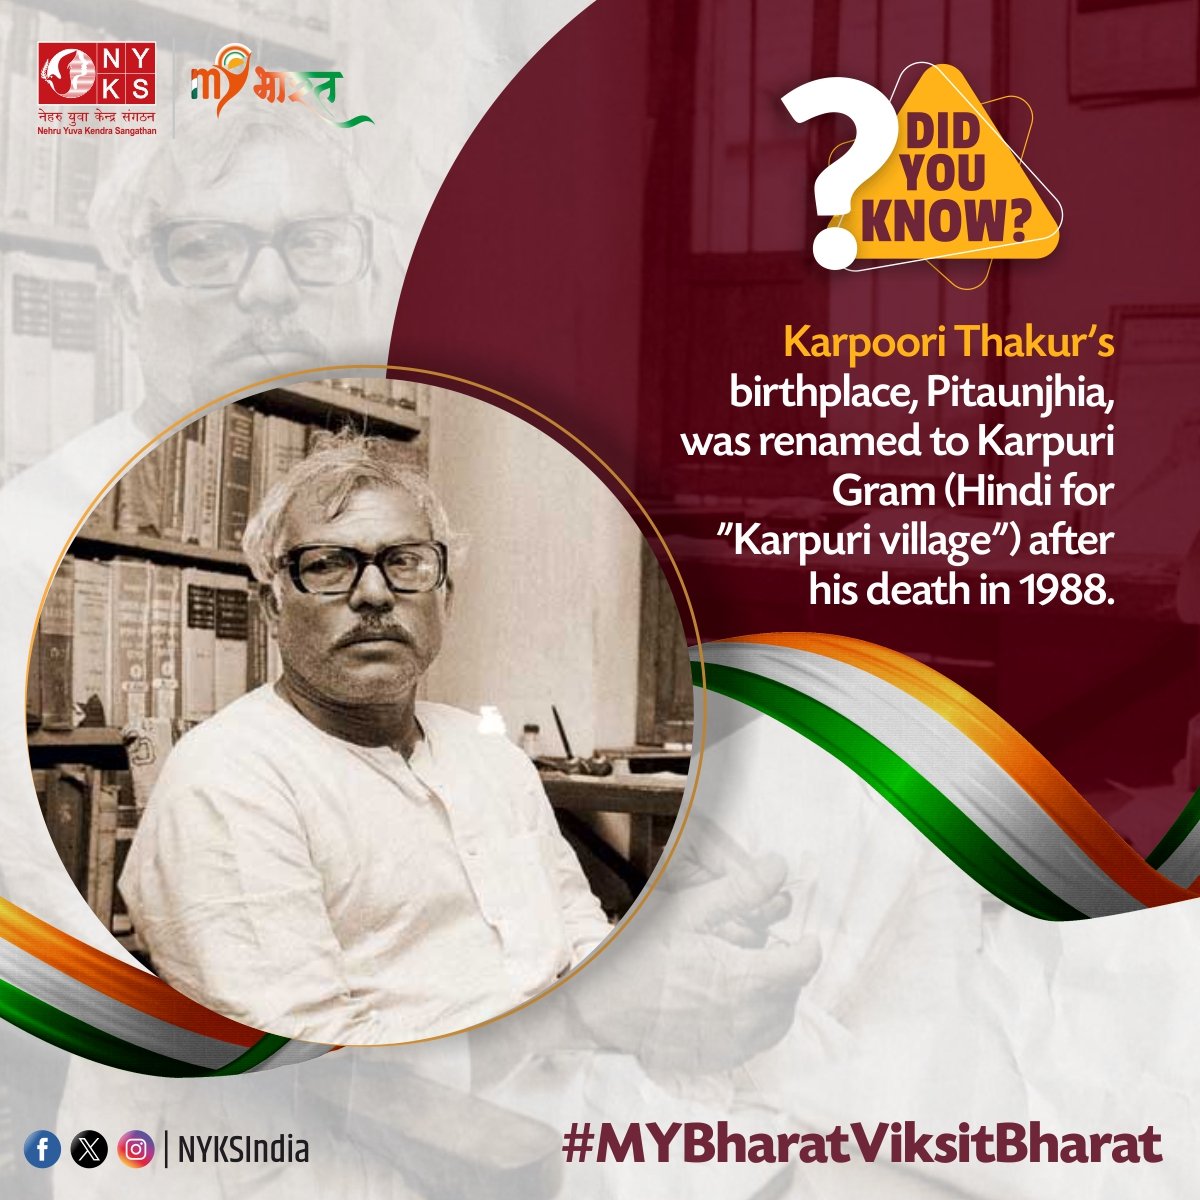 Did you know? Pitaunjhia, the birthplace of #KarpooriThakur Ji, was rechristened as Karpuri Gram (Hindi for 'Karpuri village') in honor of this influential leader after his passing in 1988. 🌍 #कर्पूरीठाकुर #जननायक #भारतरत्न #NYKS #Legacy